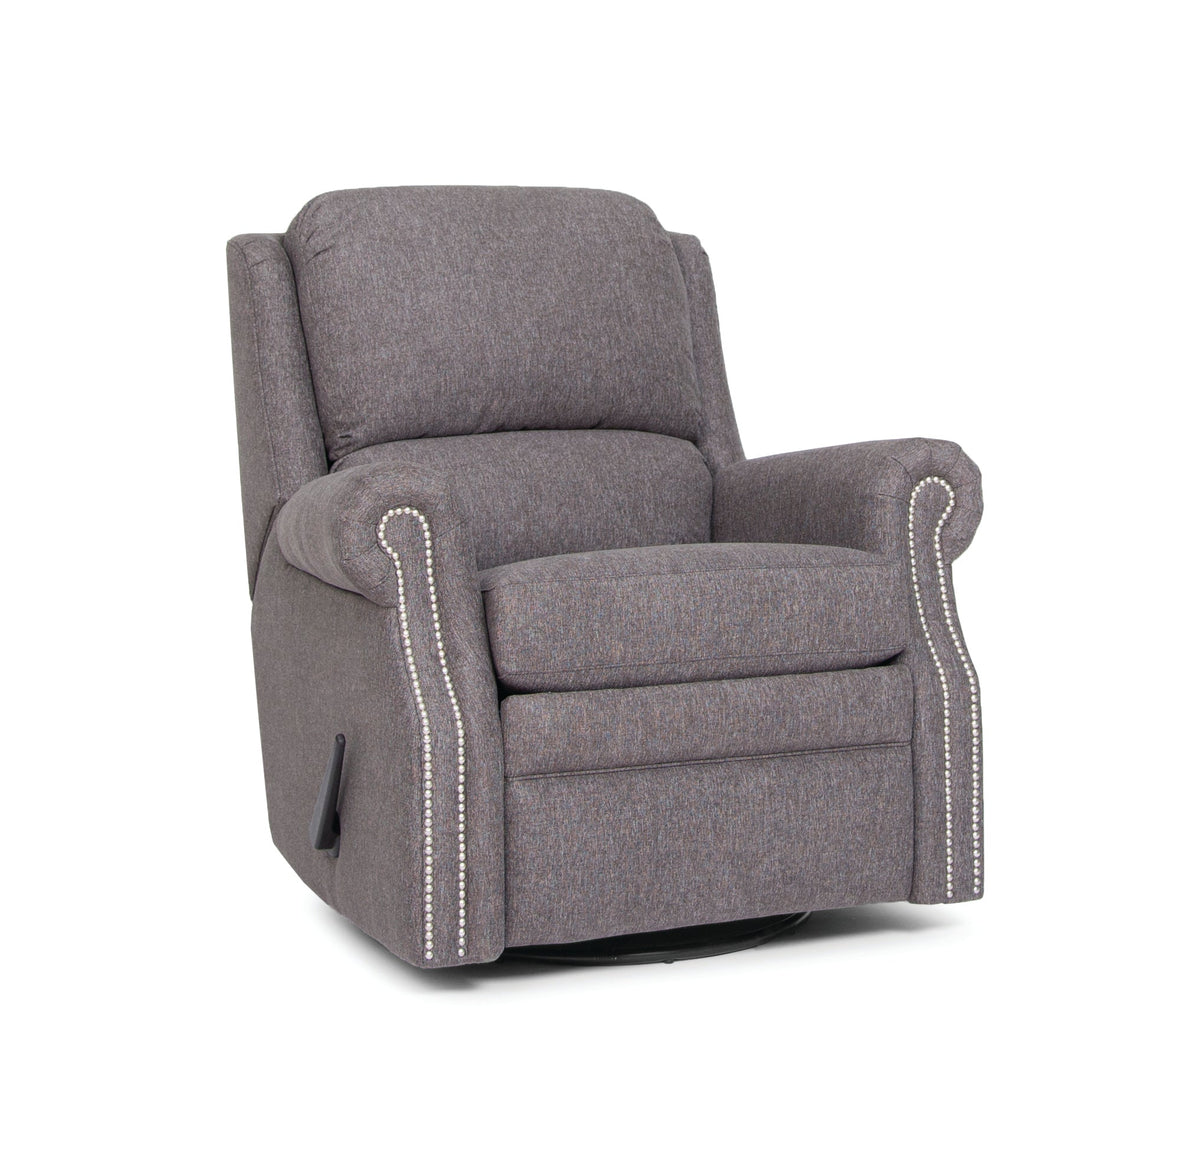 731 Style Swivel Glider Reclining Chair